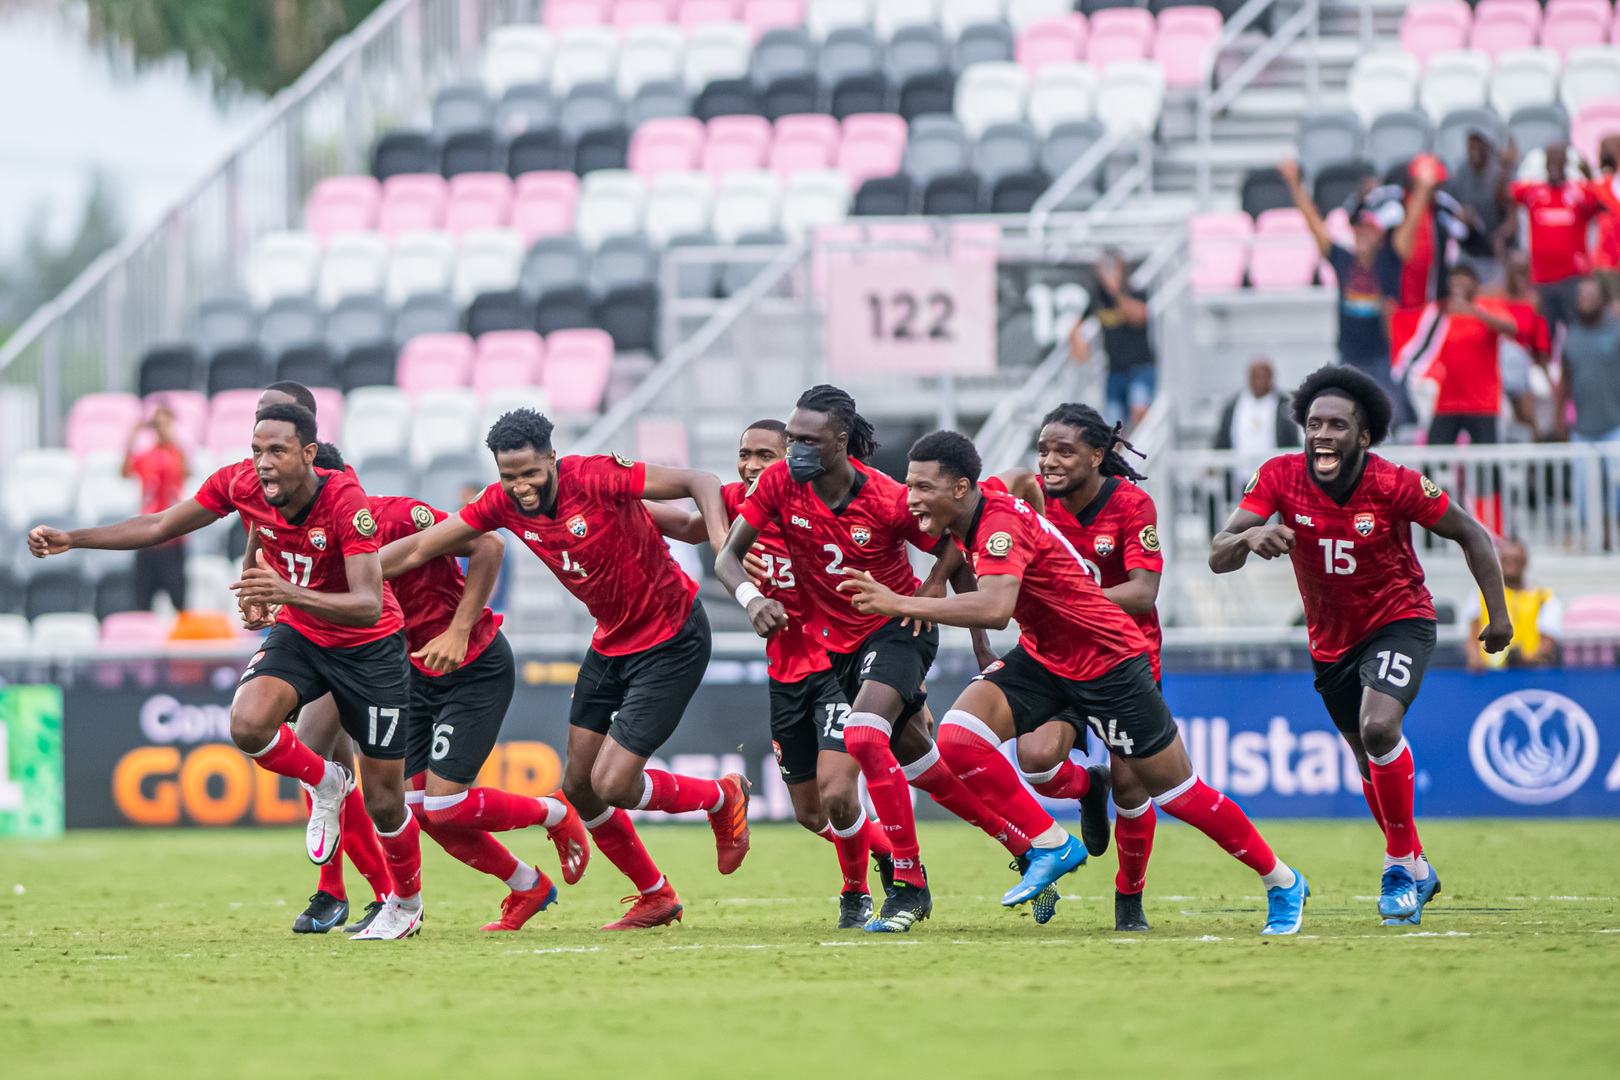 Photo: Trinidad and Tobago players celebrate after defeating in a dramatic 8-7 penalty shootout to French Guiana following a 1-1 draw in the Second Round of the 2021 Gold Cup Prelims on July 6 2021, at DRV PNK Stadium in Fort Lauderdale, Florida.